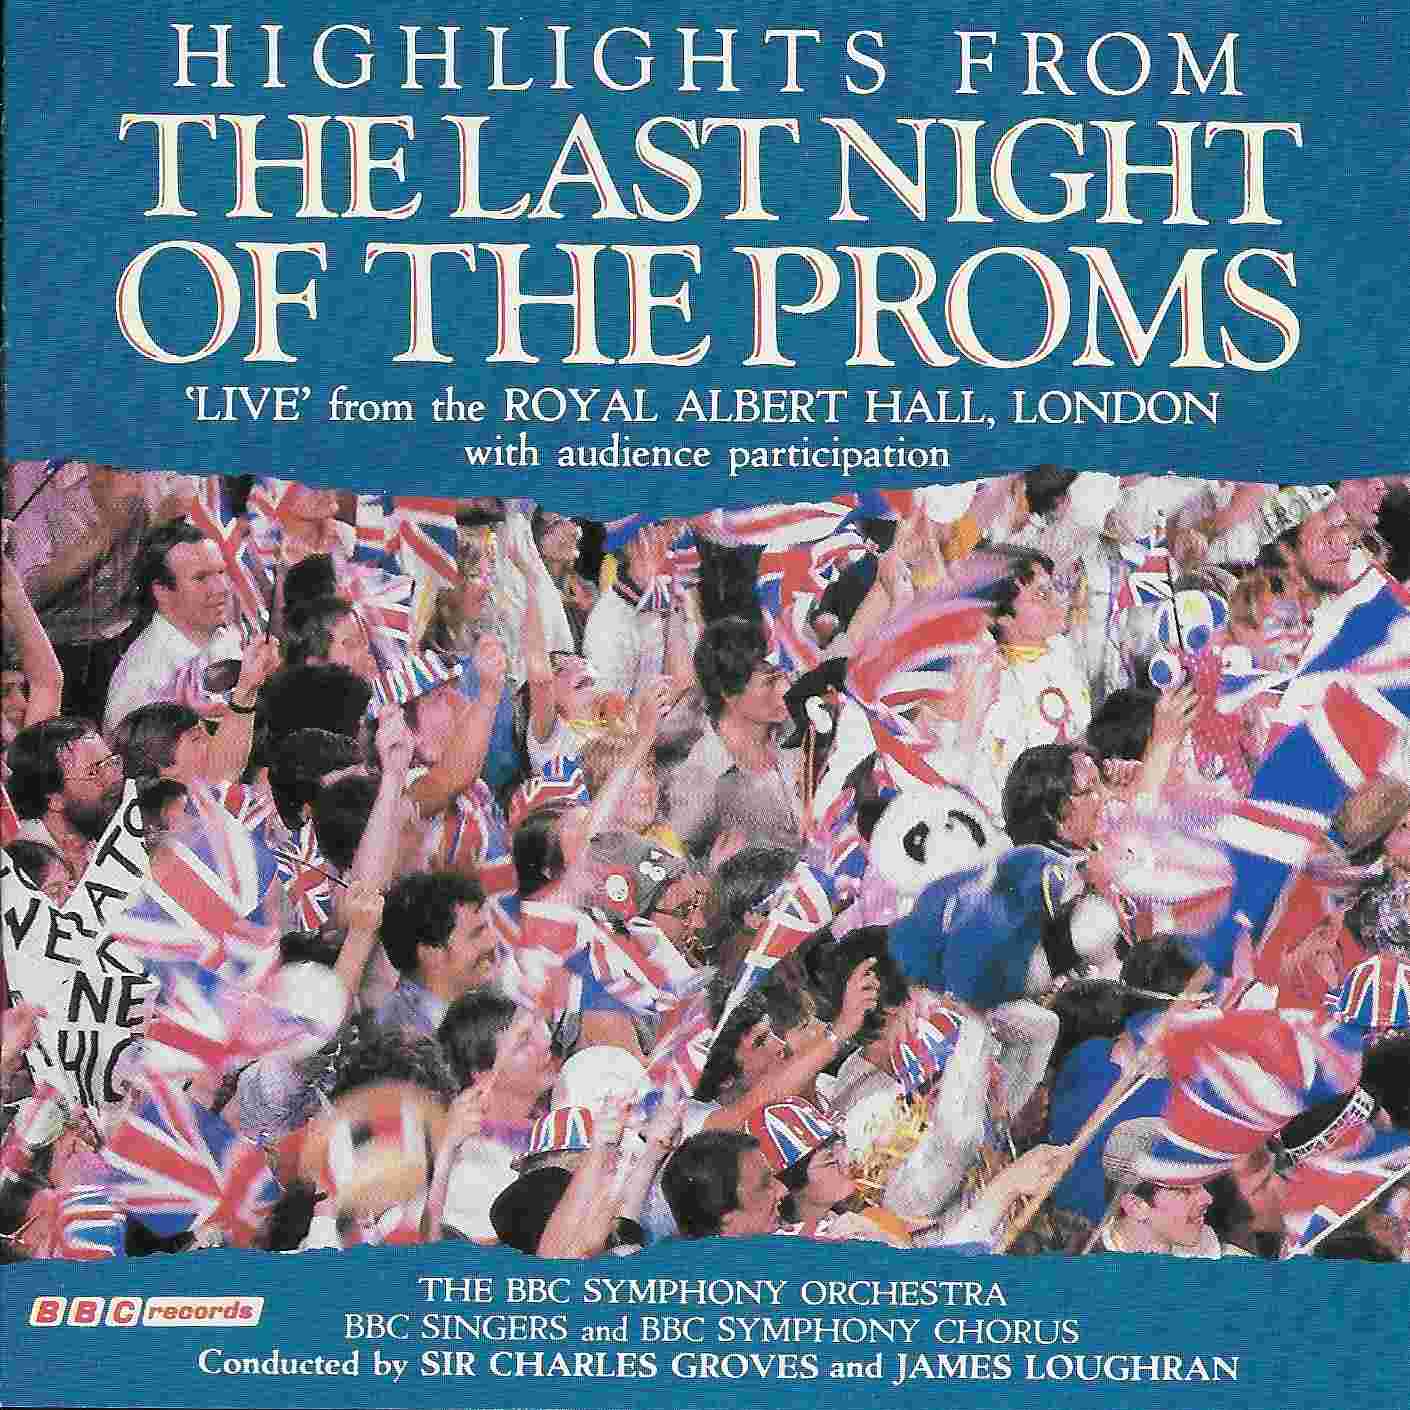 Picture of BBCCD580X Last night of the proms by artist Various from the BBC cds - Records and Tapes library